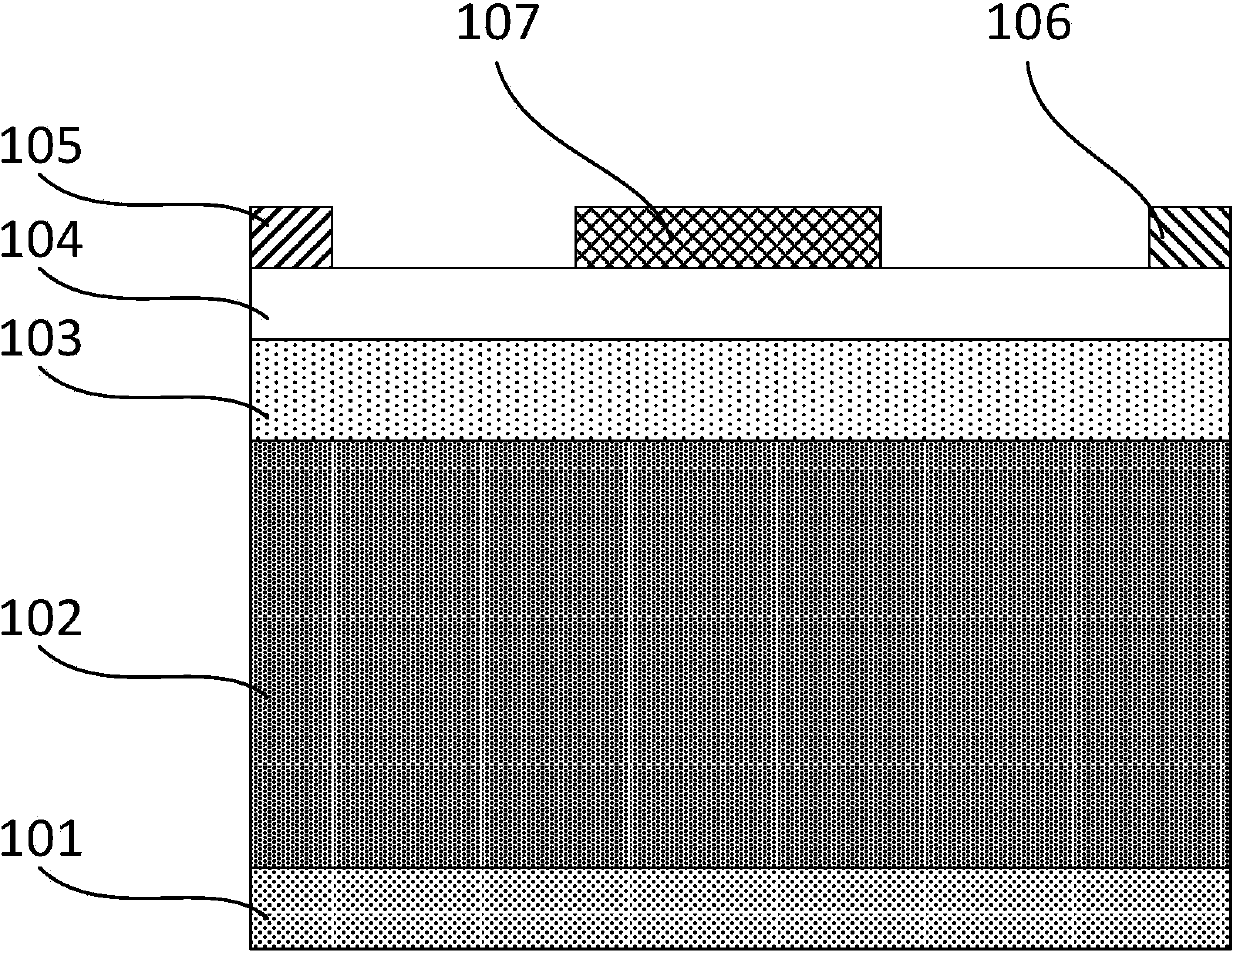 Gallium-nitride-based heterostructure field effect transistor with composite barrier layers